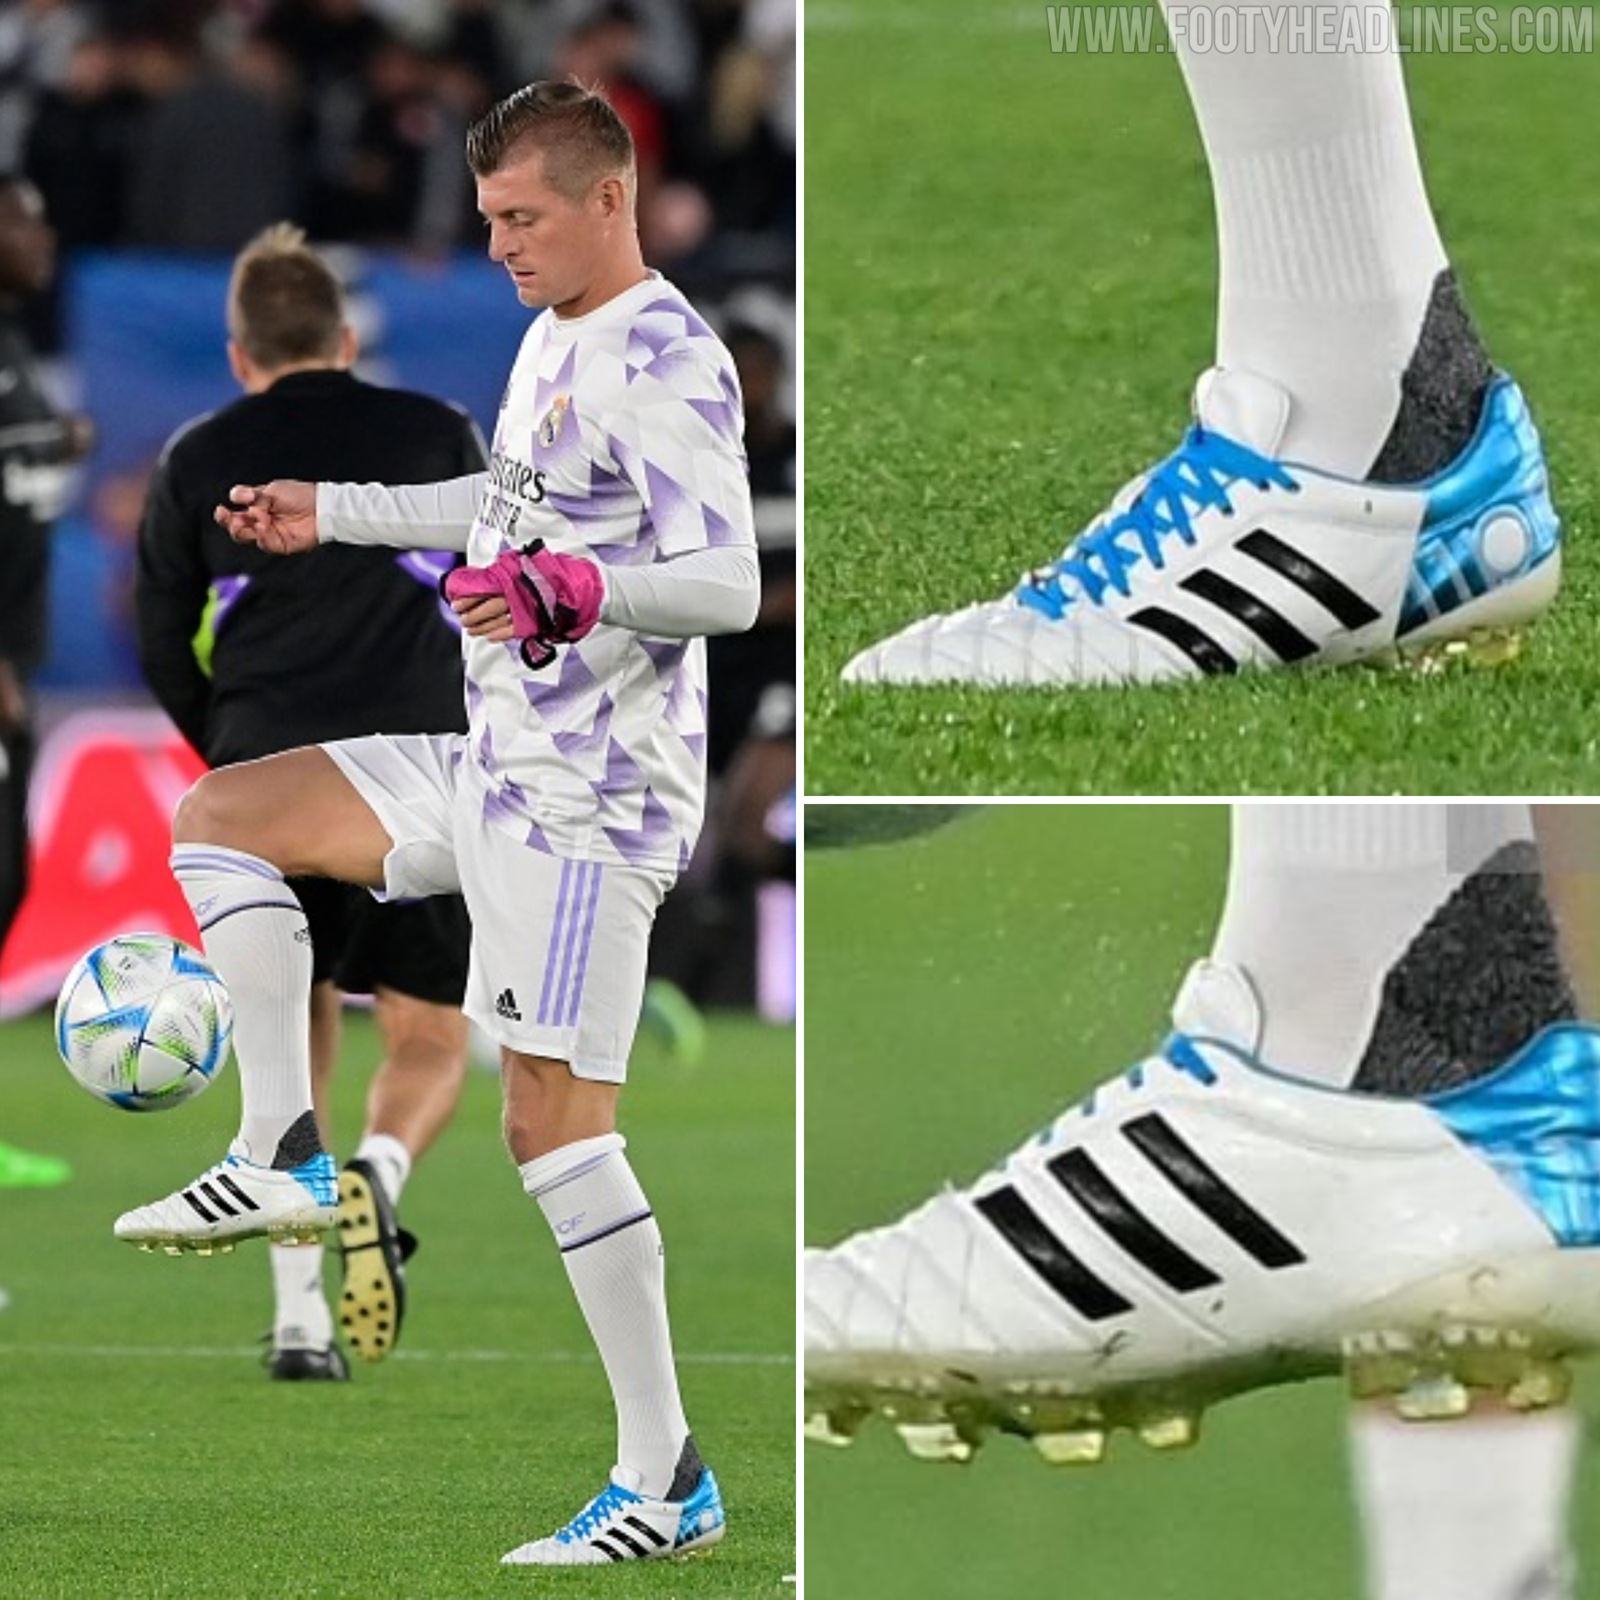 Broken Boots: Toni Kroos Switches to Brand-New Adidas Adipure 11pro Boots - Footy Headlines